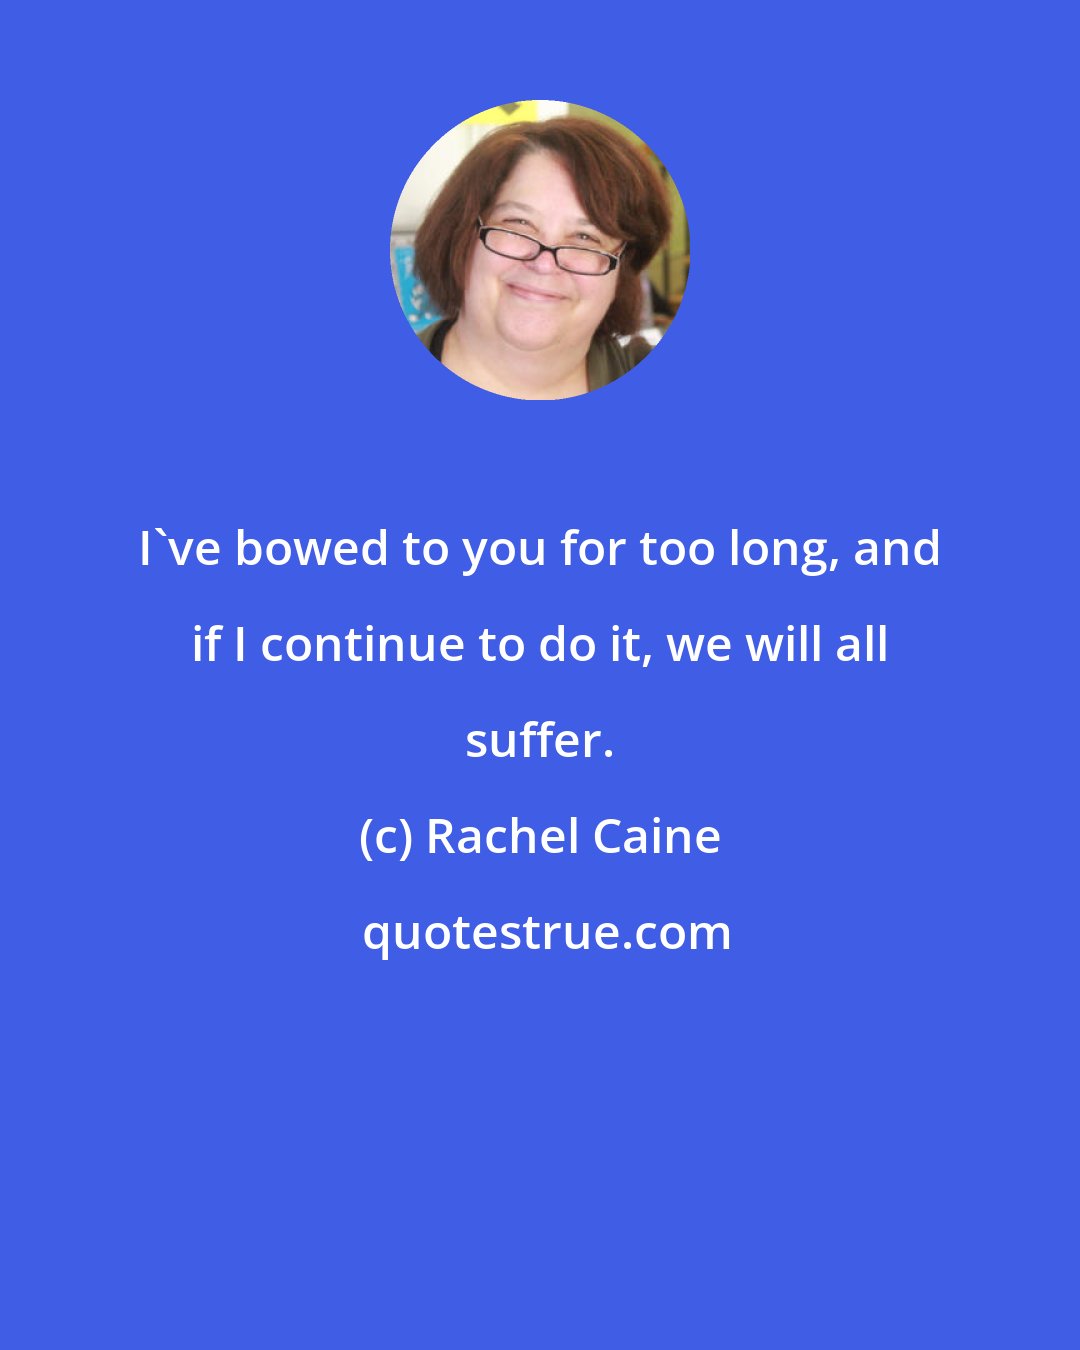 Rachel Caine: I've bowed to you for too long, and if I continue to do it, we will all suffer.